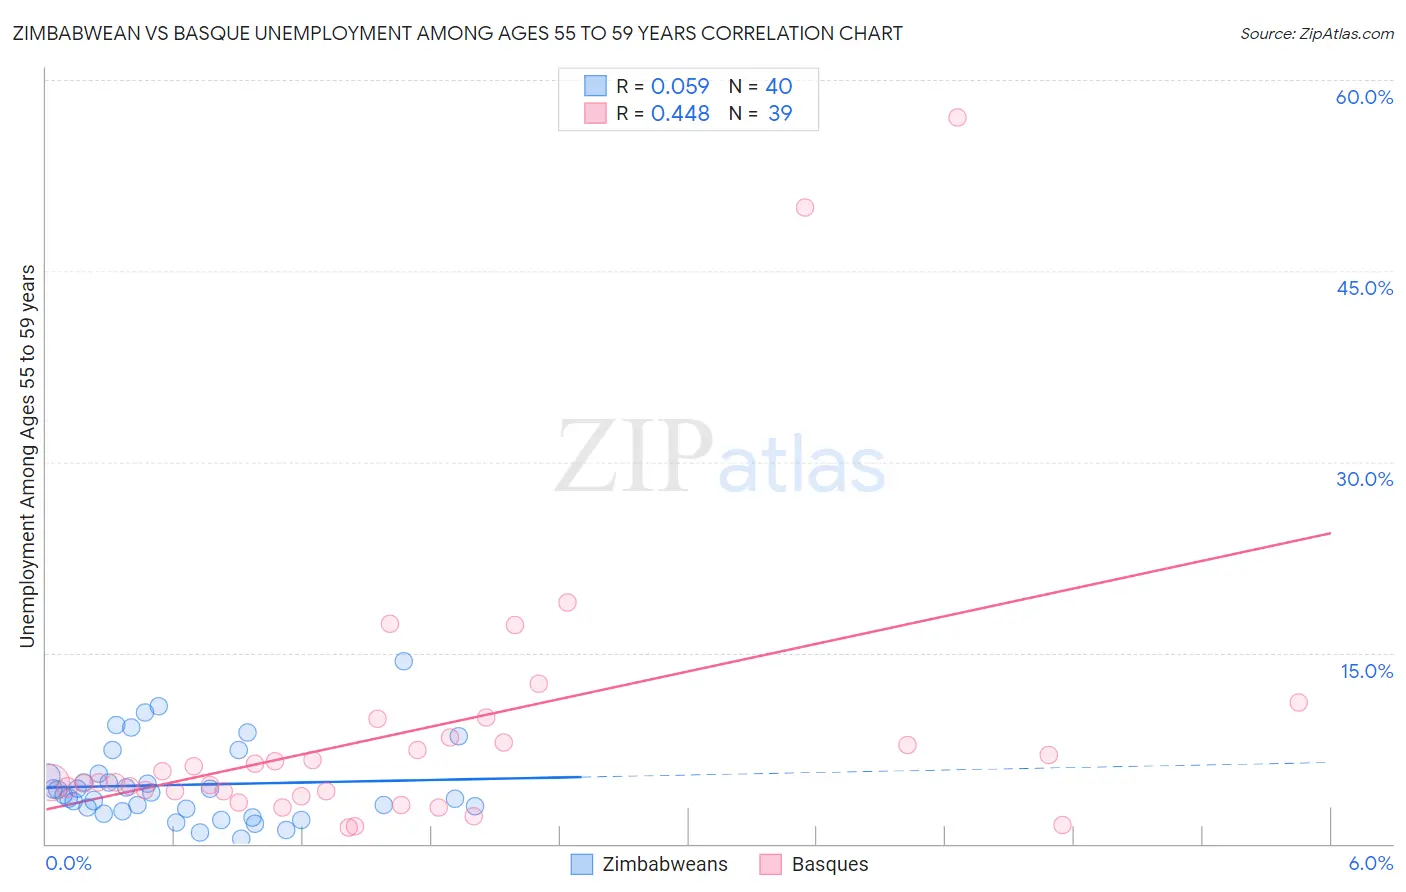 Zimbabwean vs Basque Unemployment Among Ages 55 to 59 years